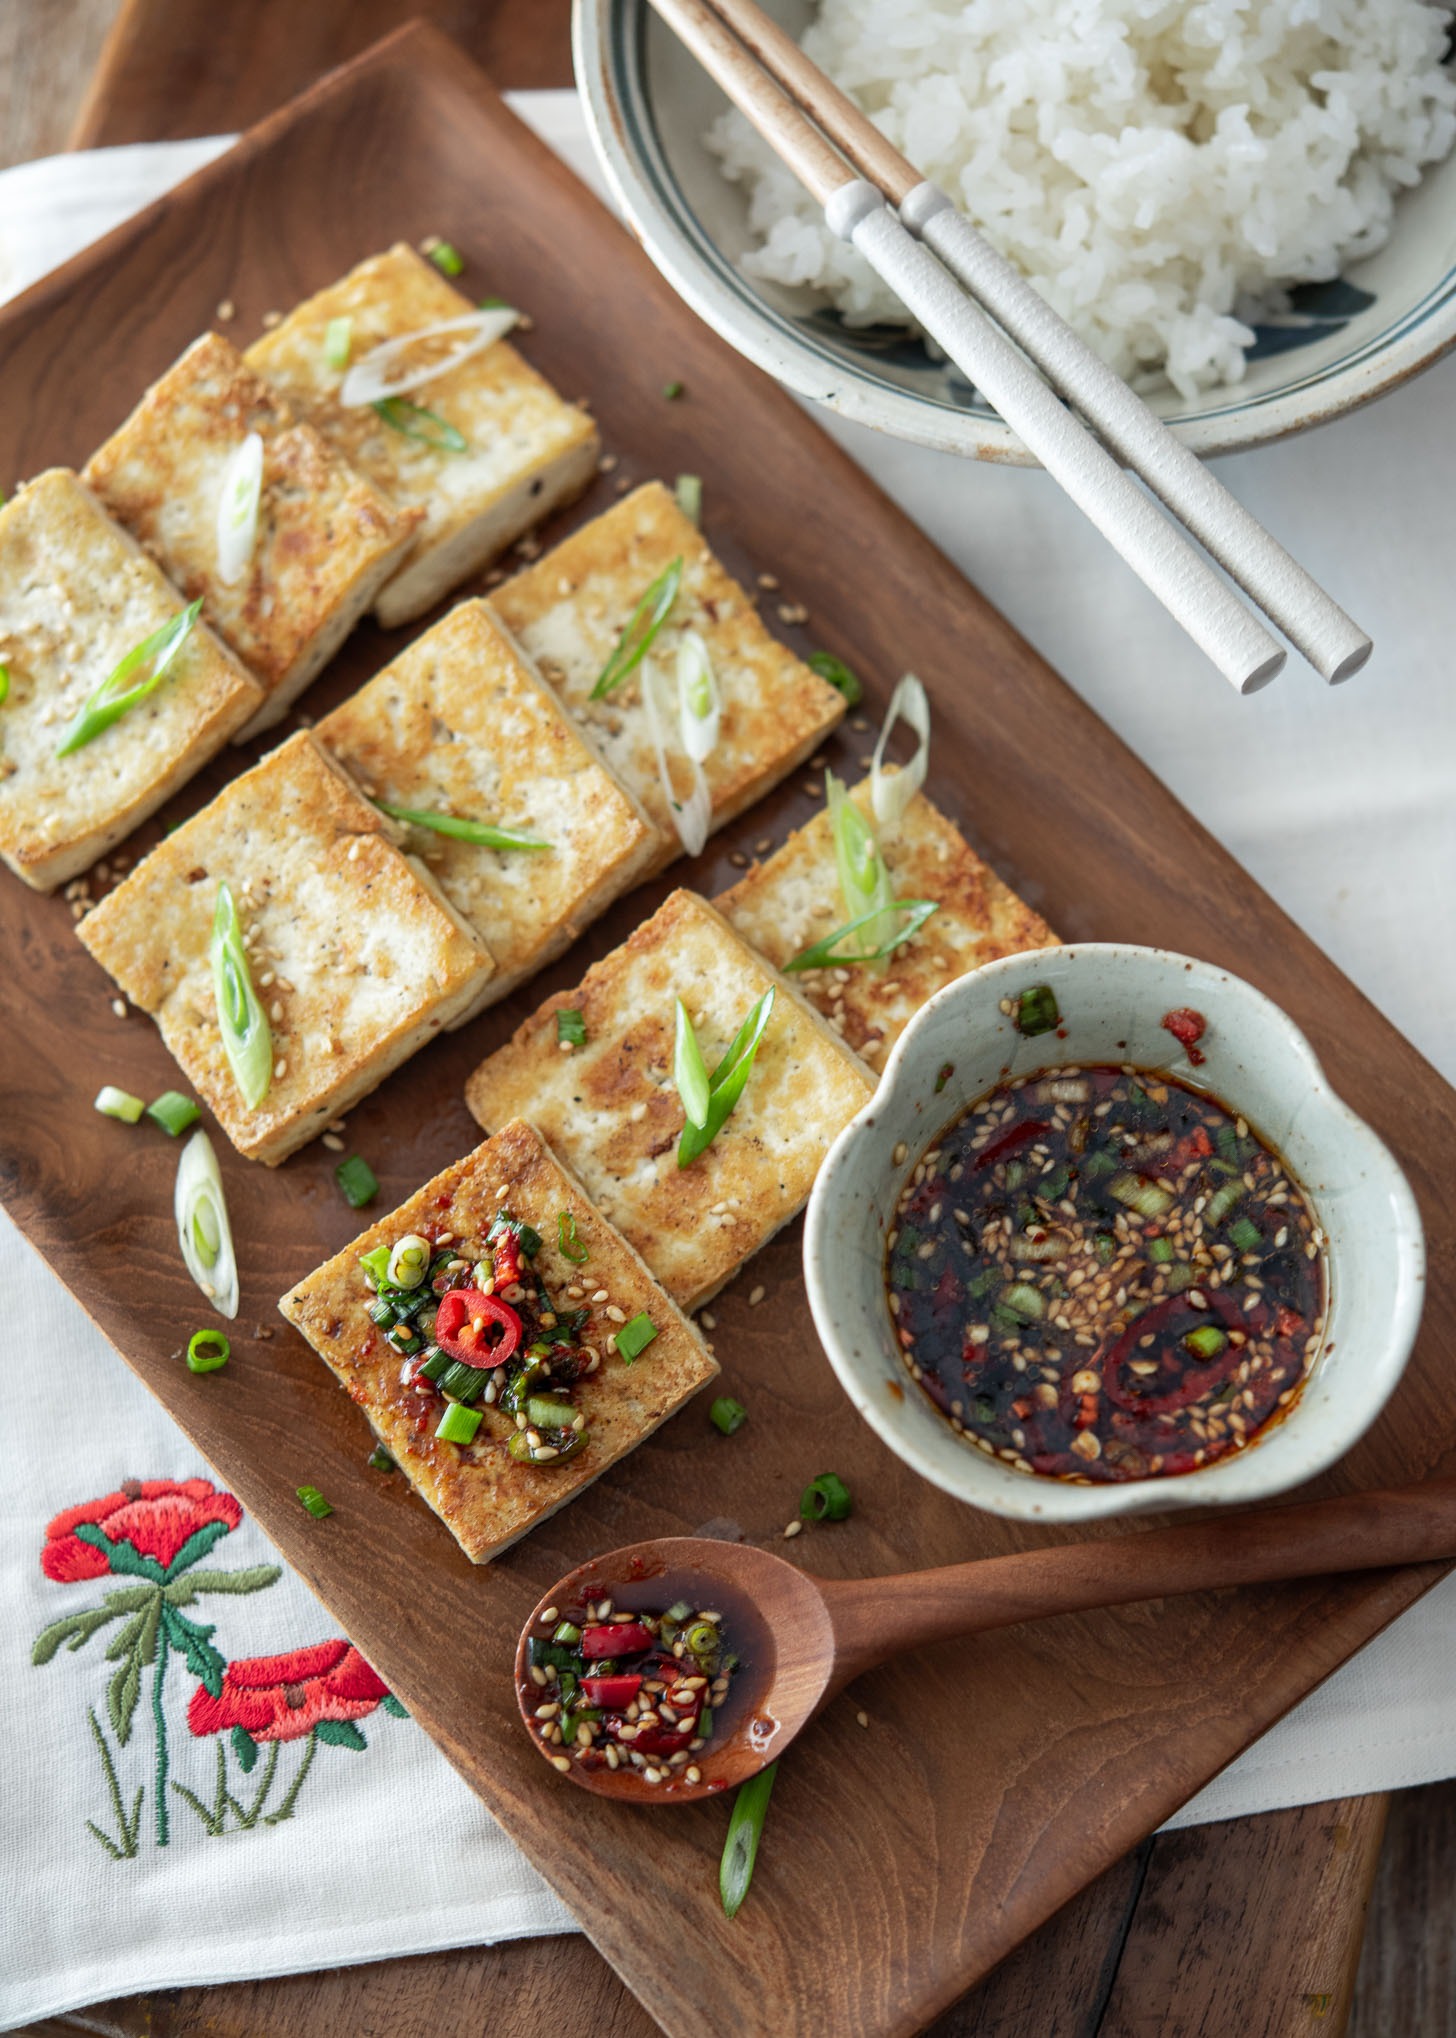 Crispy pan-fried tofu slices topped with soy dipping sauce.